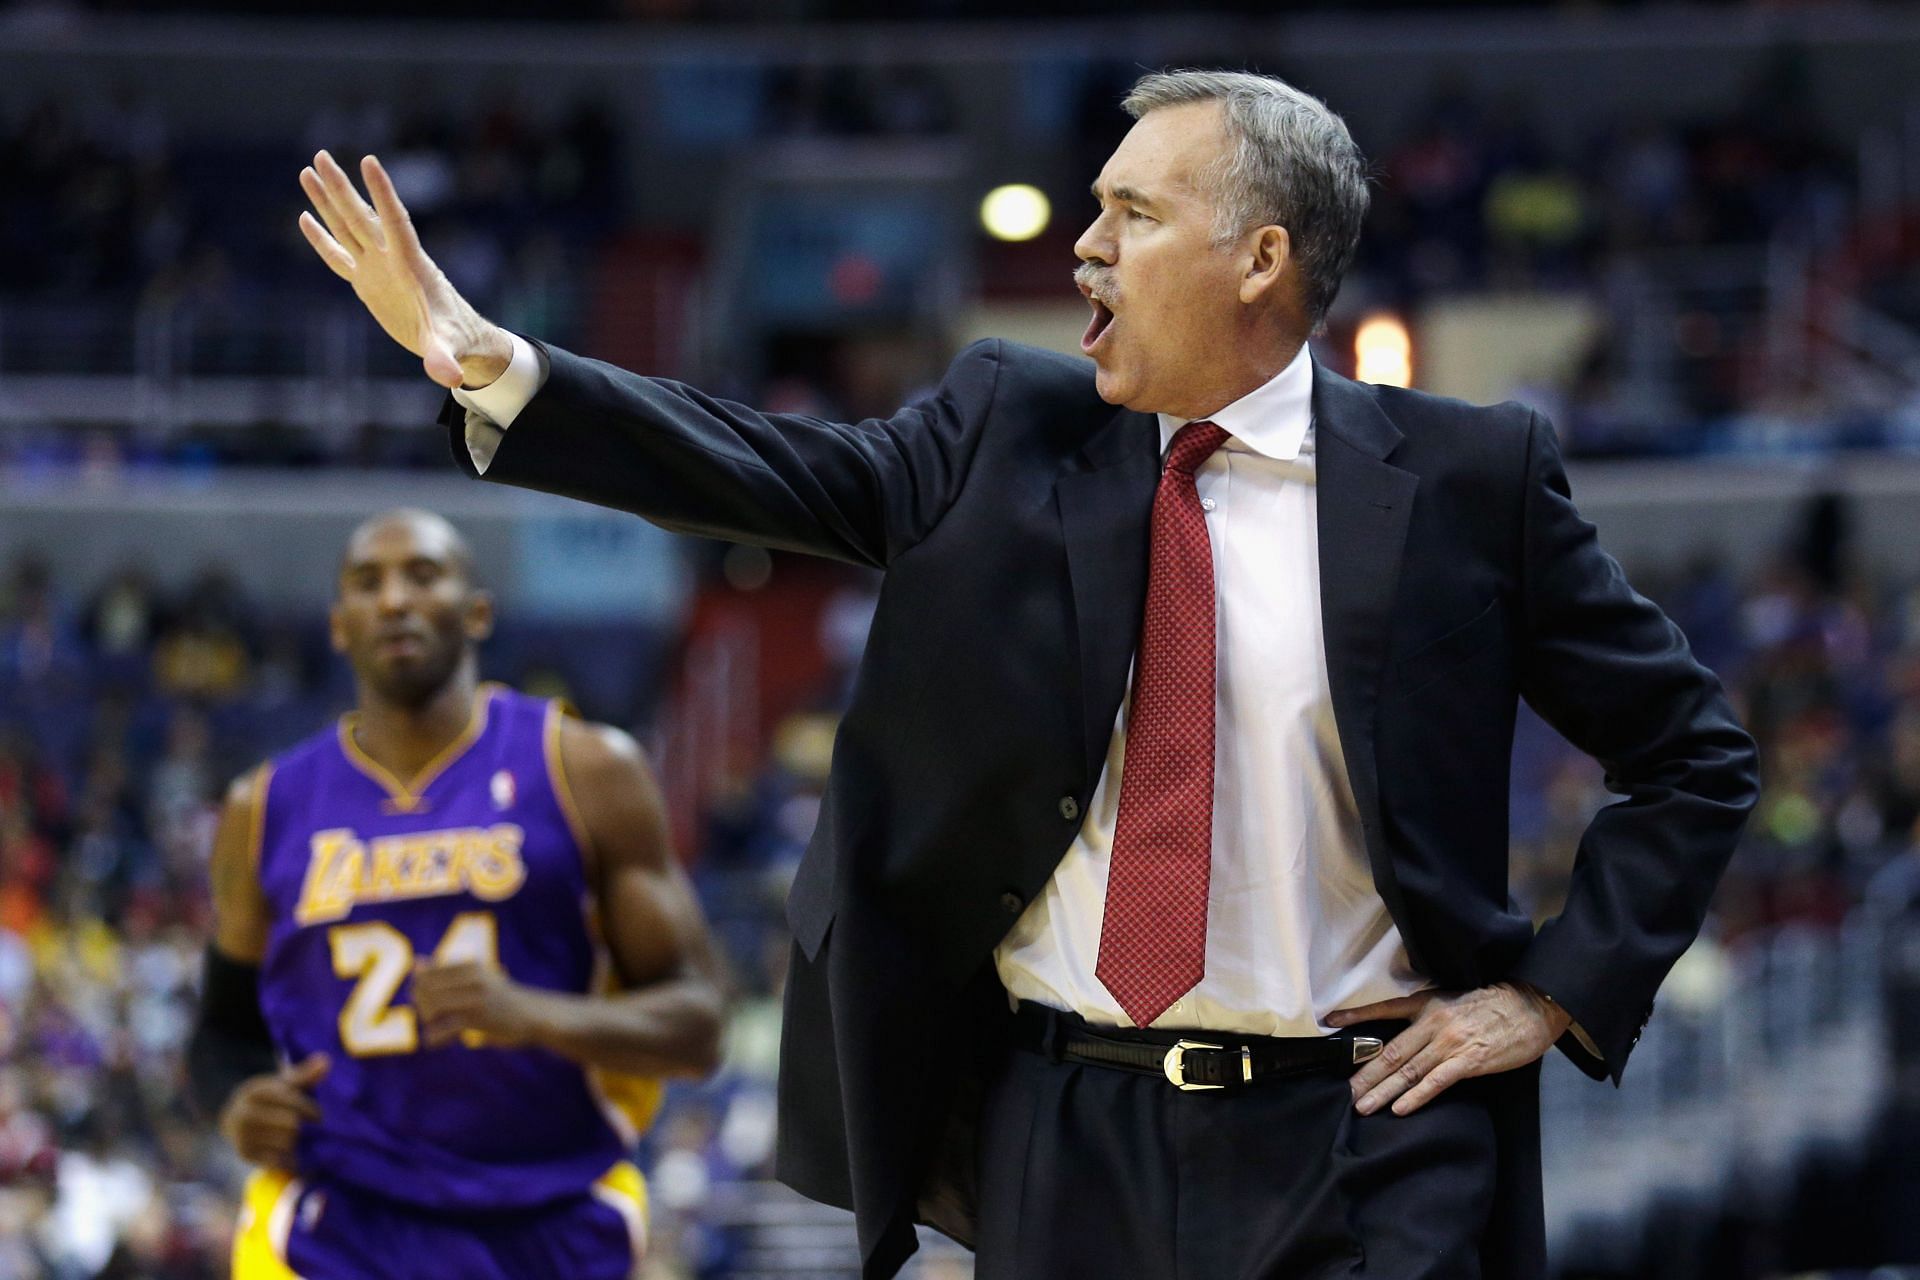 Mike D&rsquo;Antoni coaching the LA Lakers in 2012-13